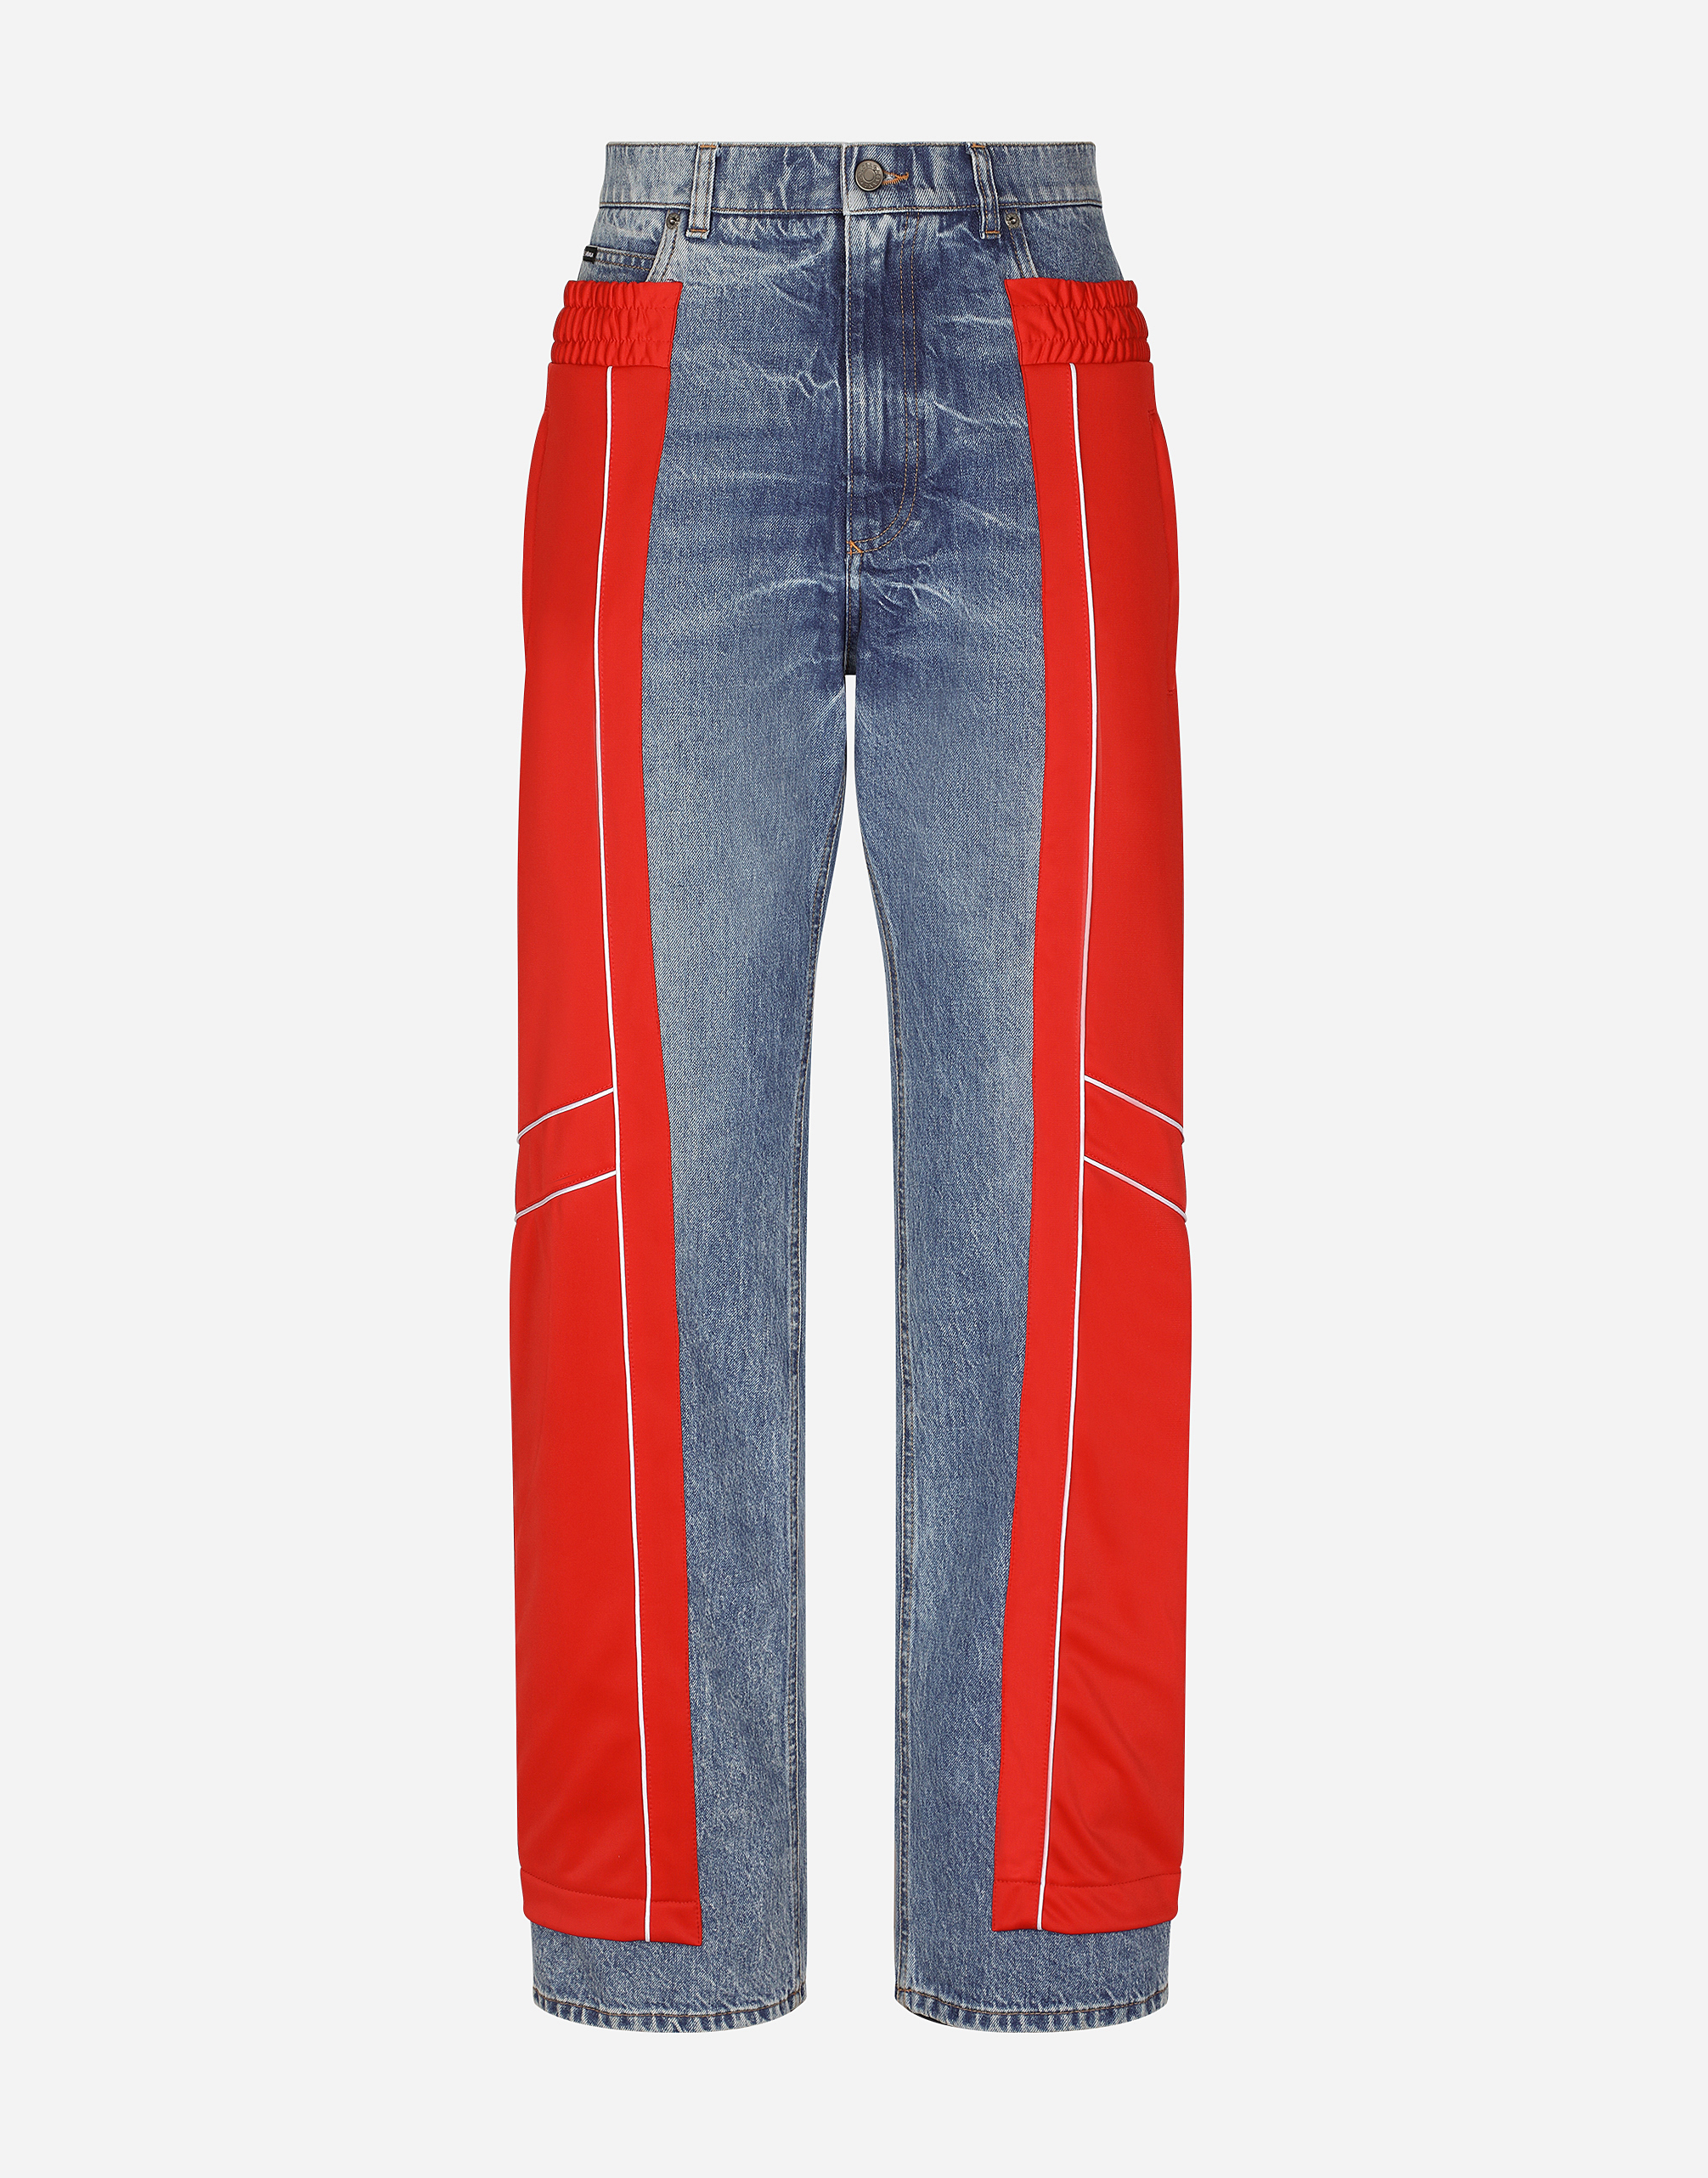 Jeans with technical jersey inserts in Multicolor